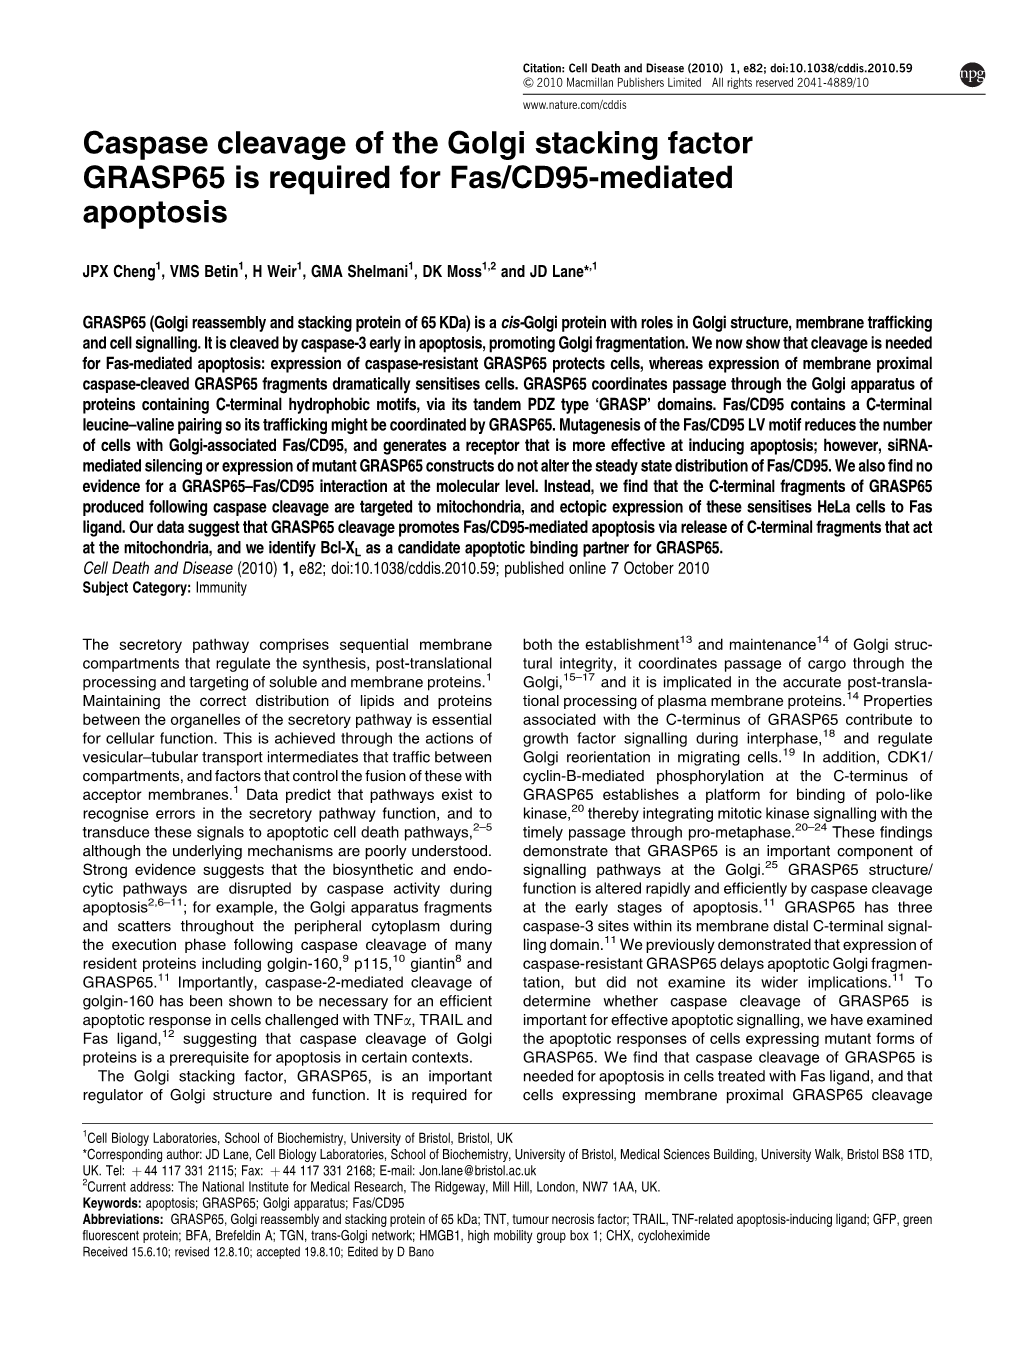 Caspase Cleavage of the Golgi Stacking Factor GRASP65 Is Required for Fas/CD95-Mediated Apoptosis